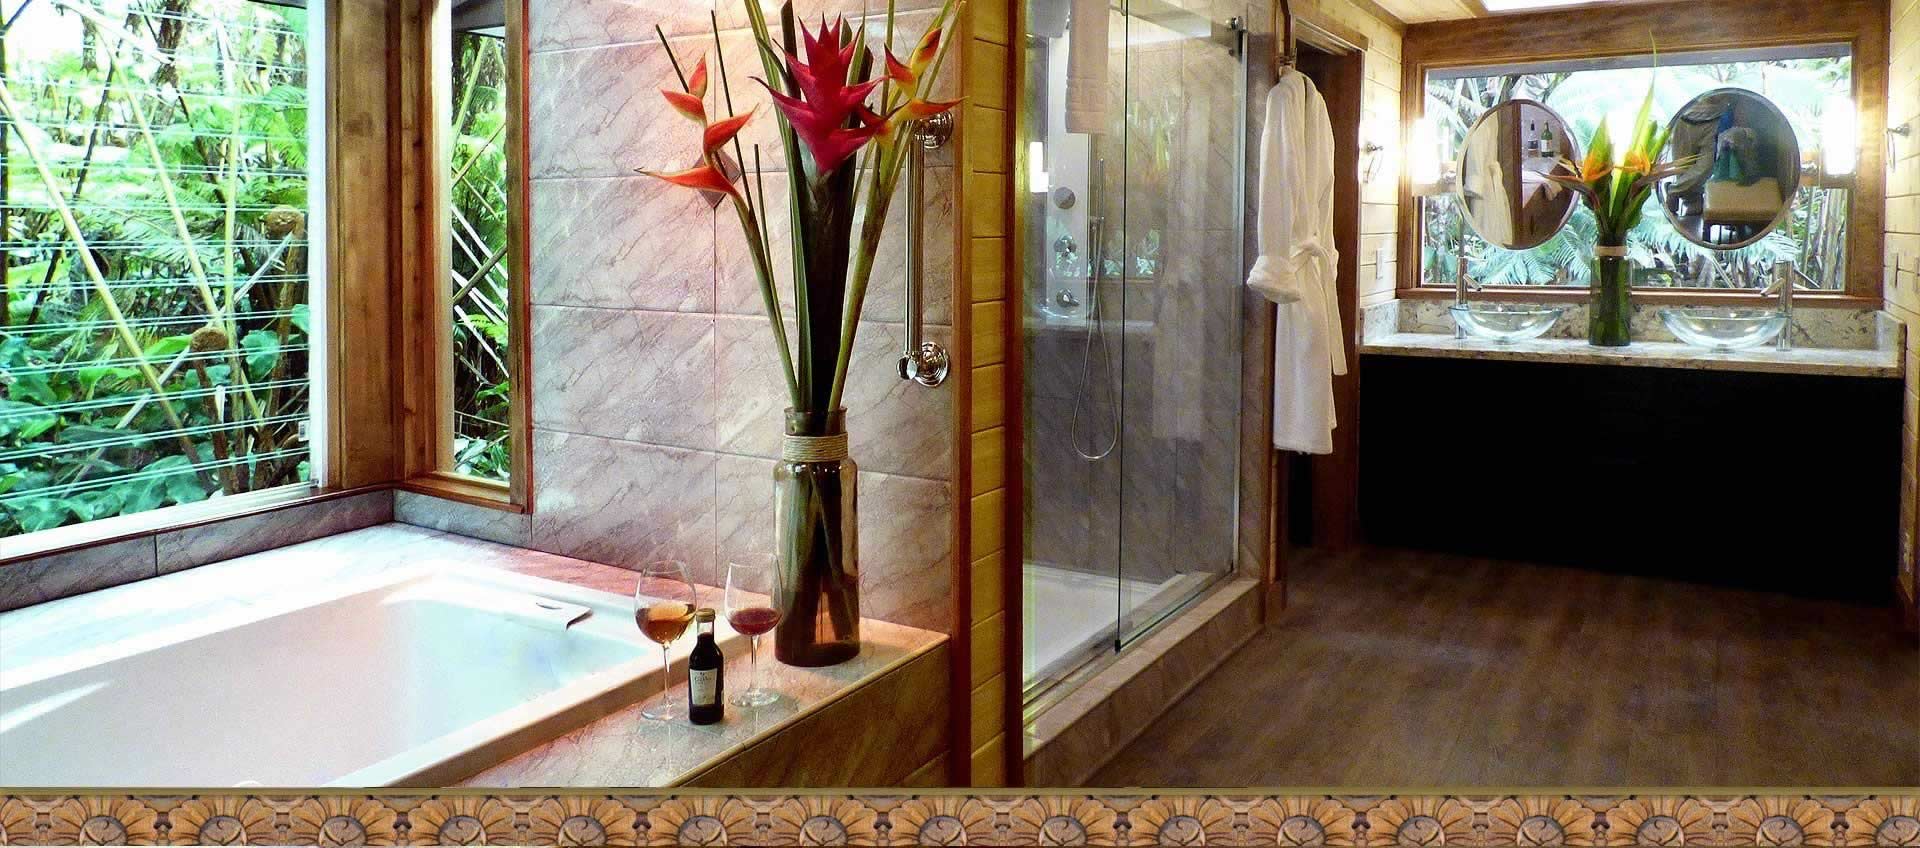 White Lotus Suite elegant master shower with stunning forest views.